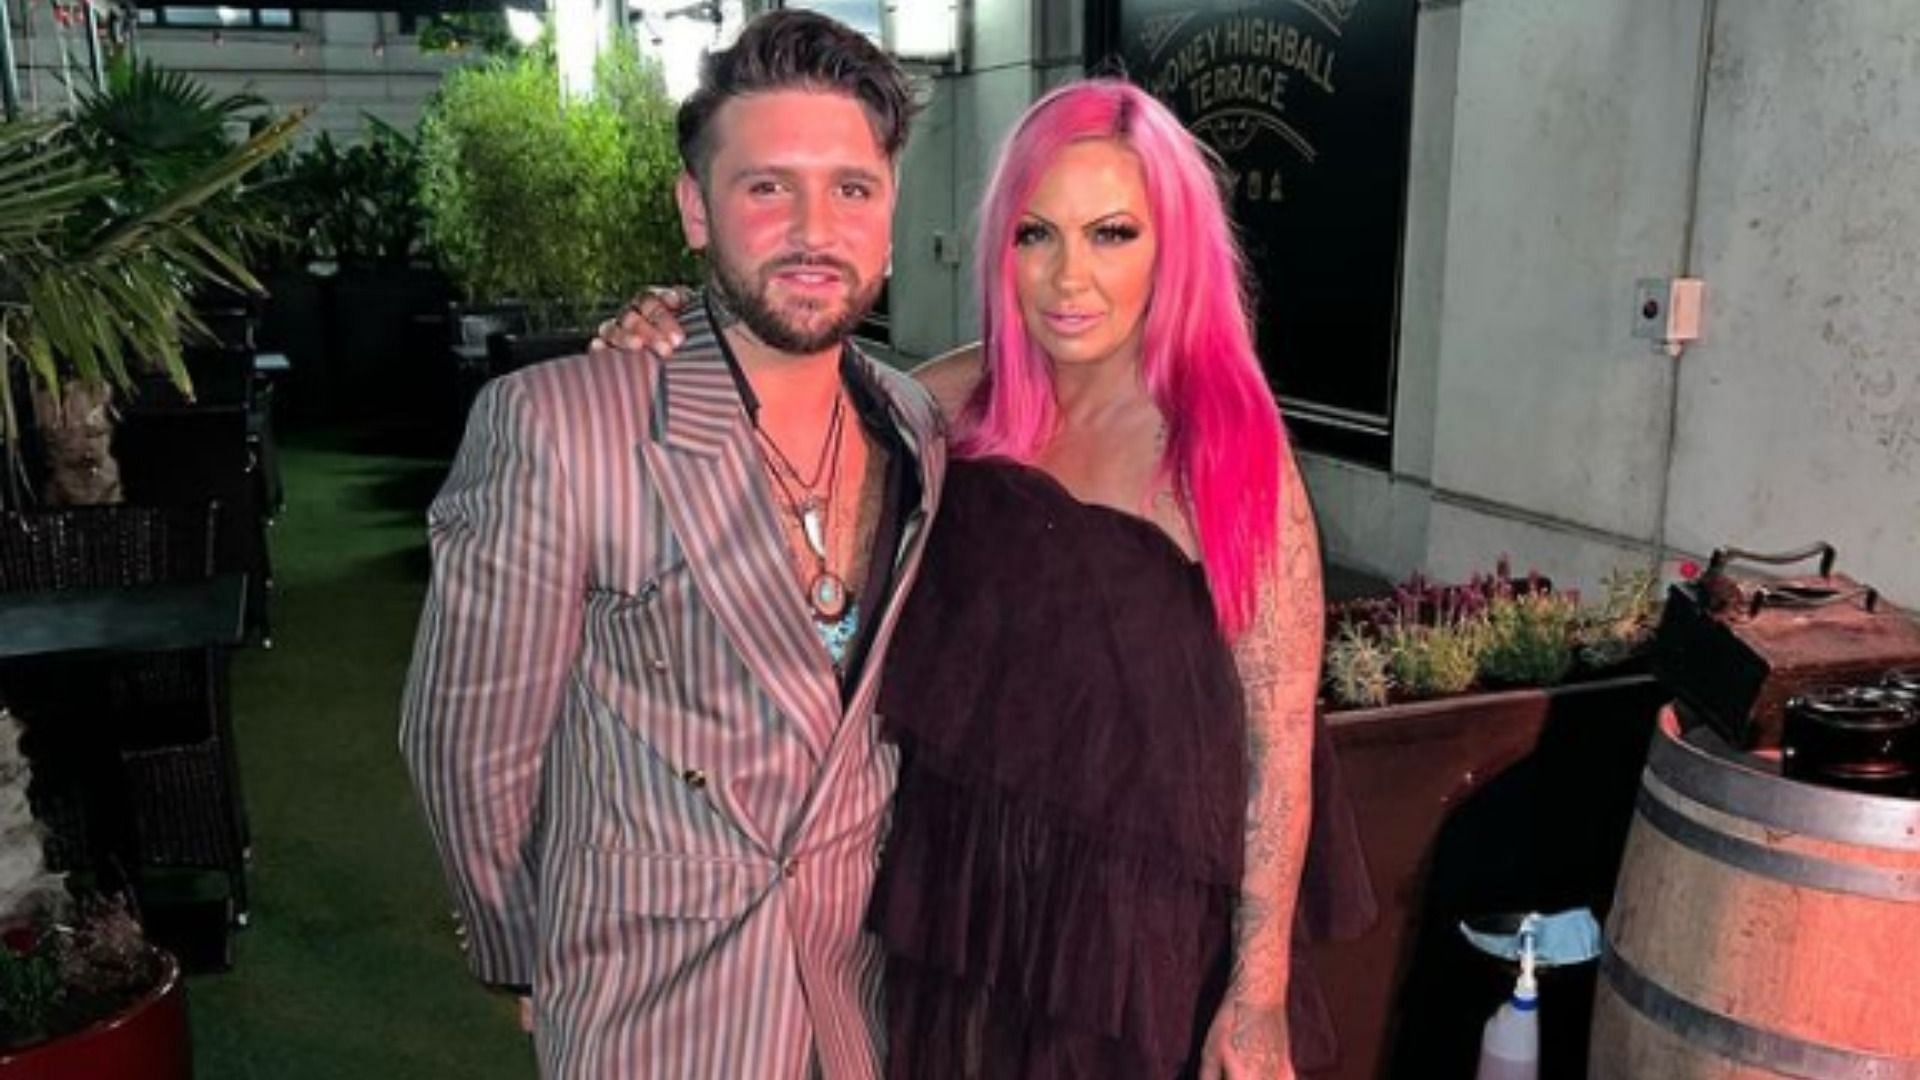 Jodie Marsh and Billy Collins started dating in 2019 and have an age gap of 17 years between them. (Image via Instagram/@jodiemarshtv)